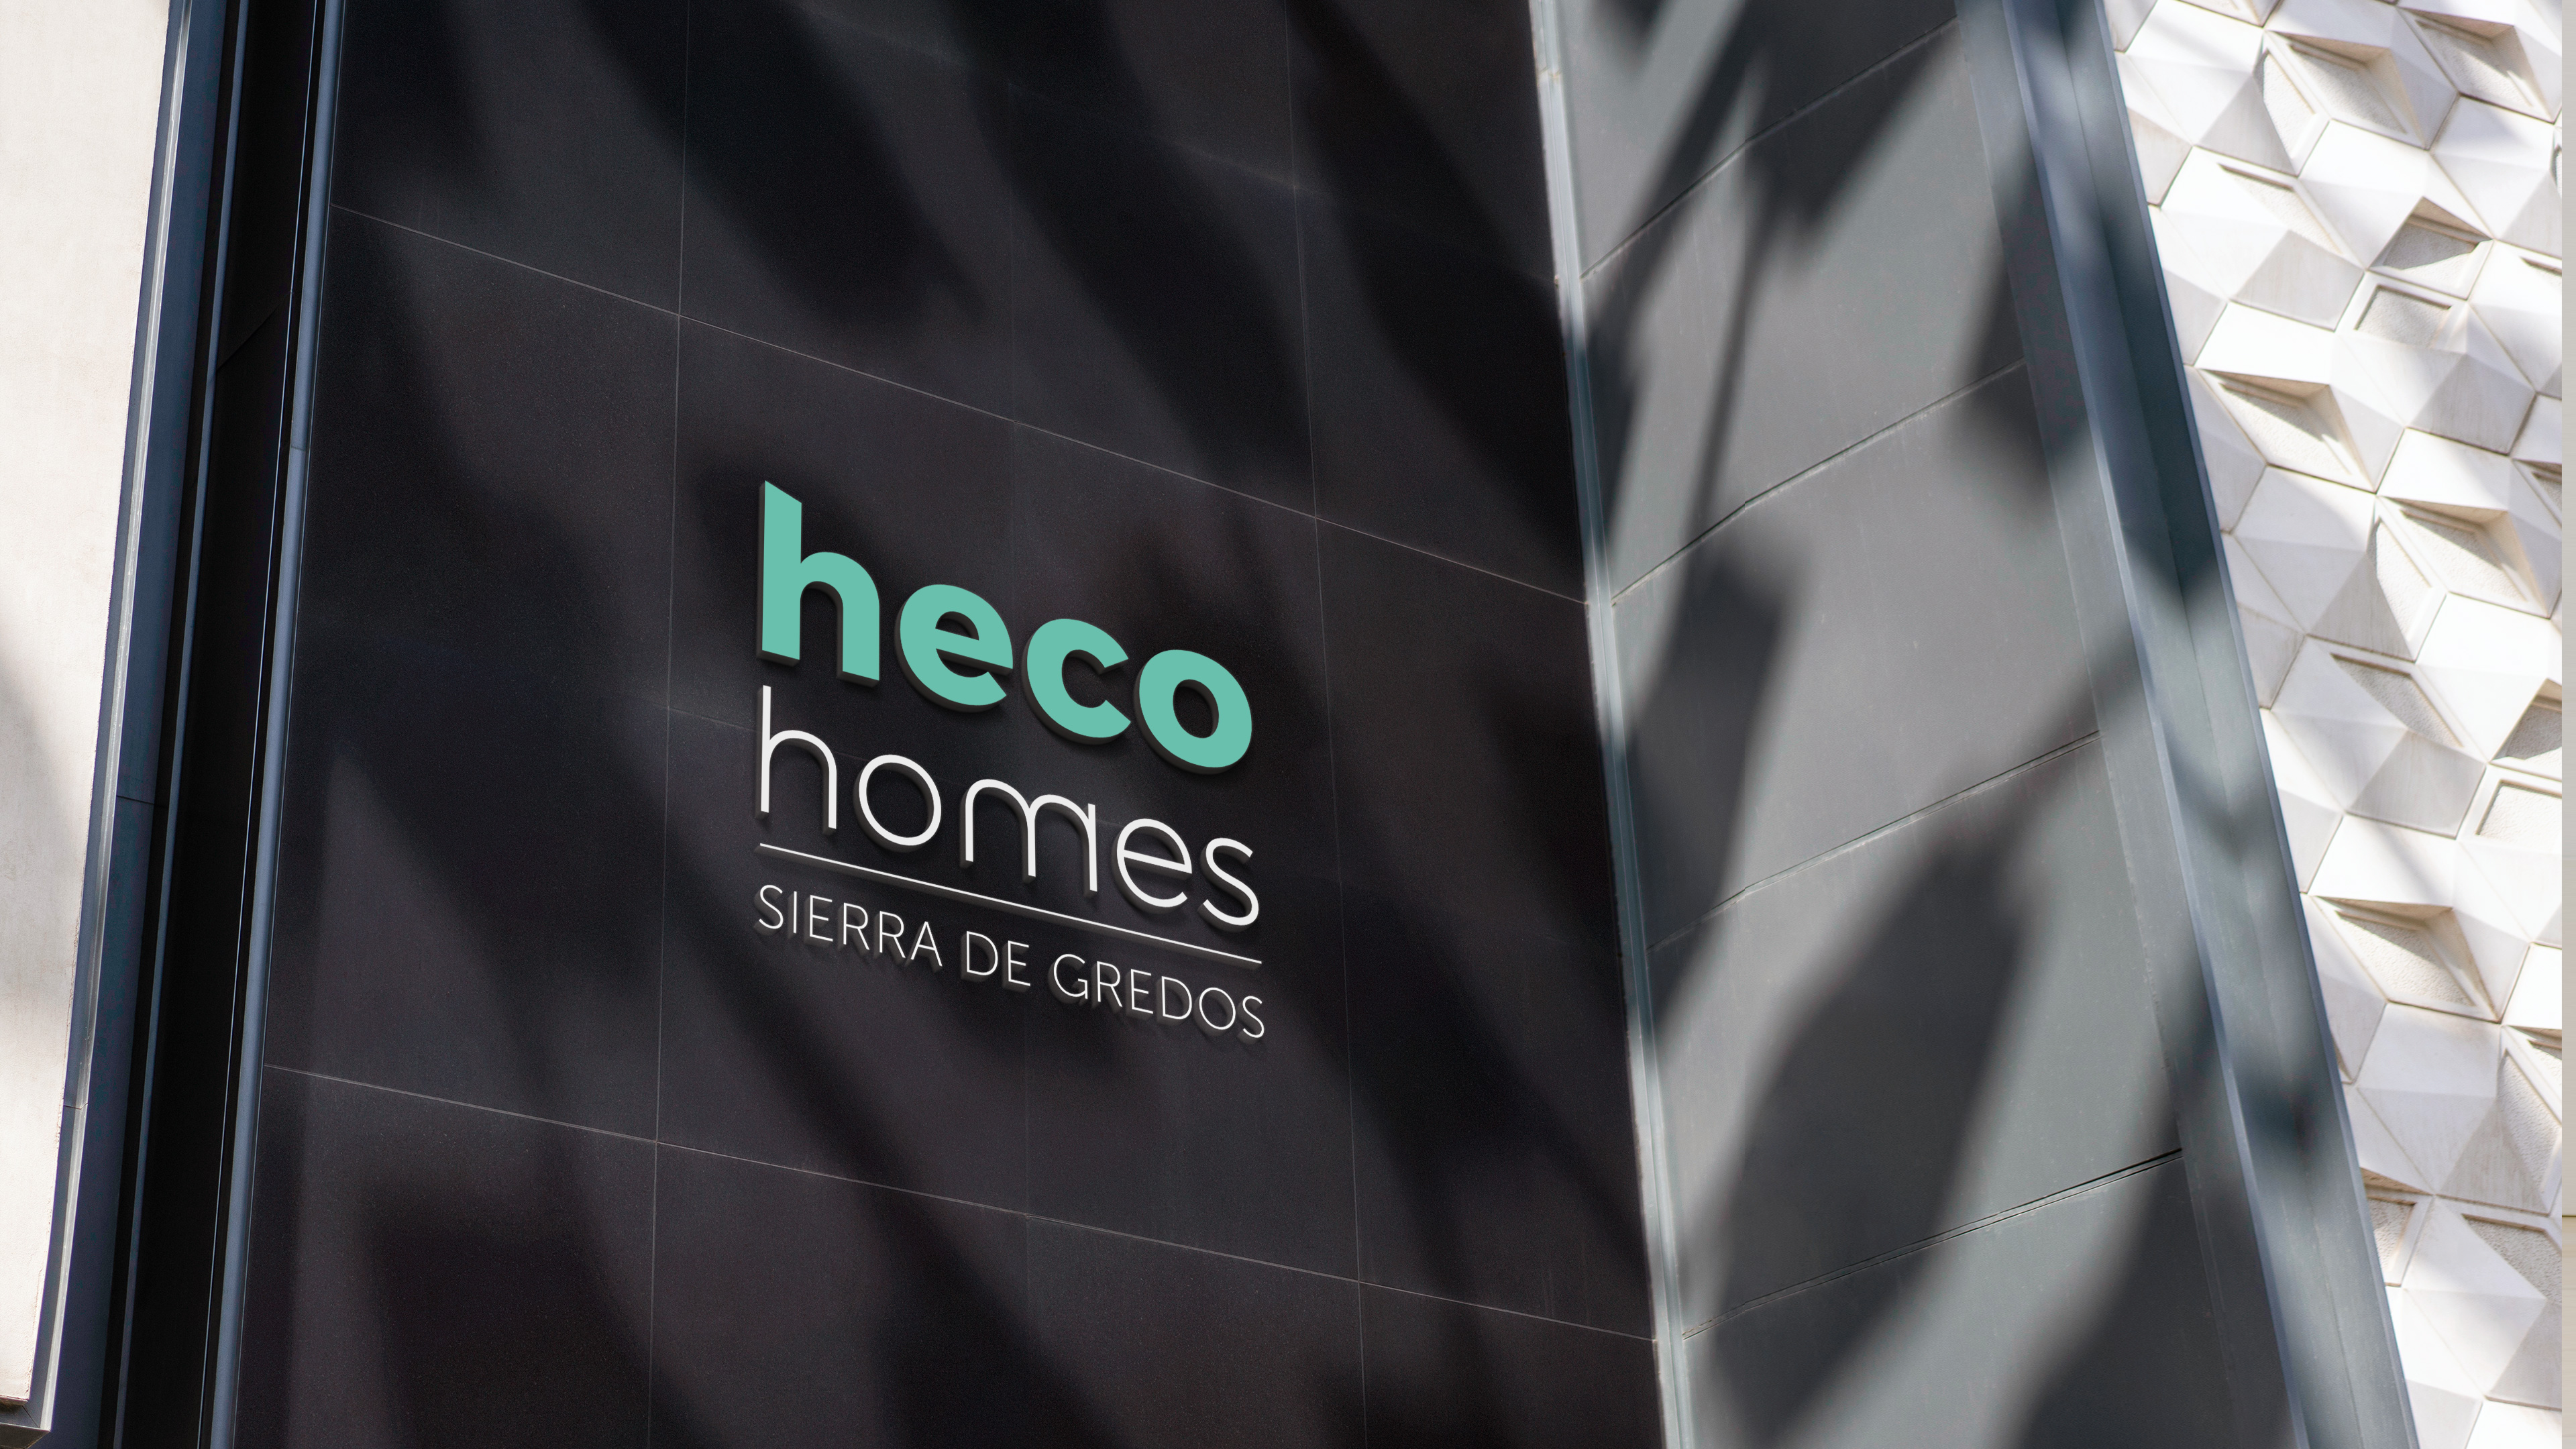 Heco Homes